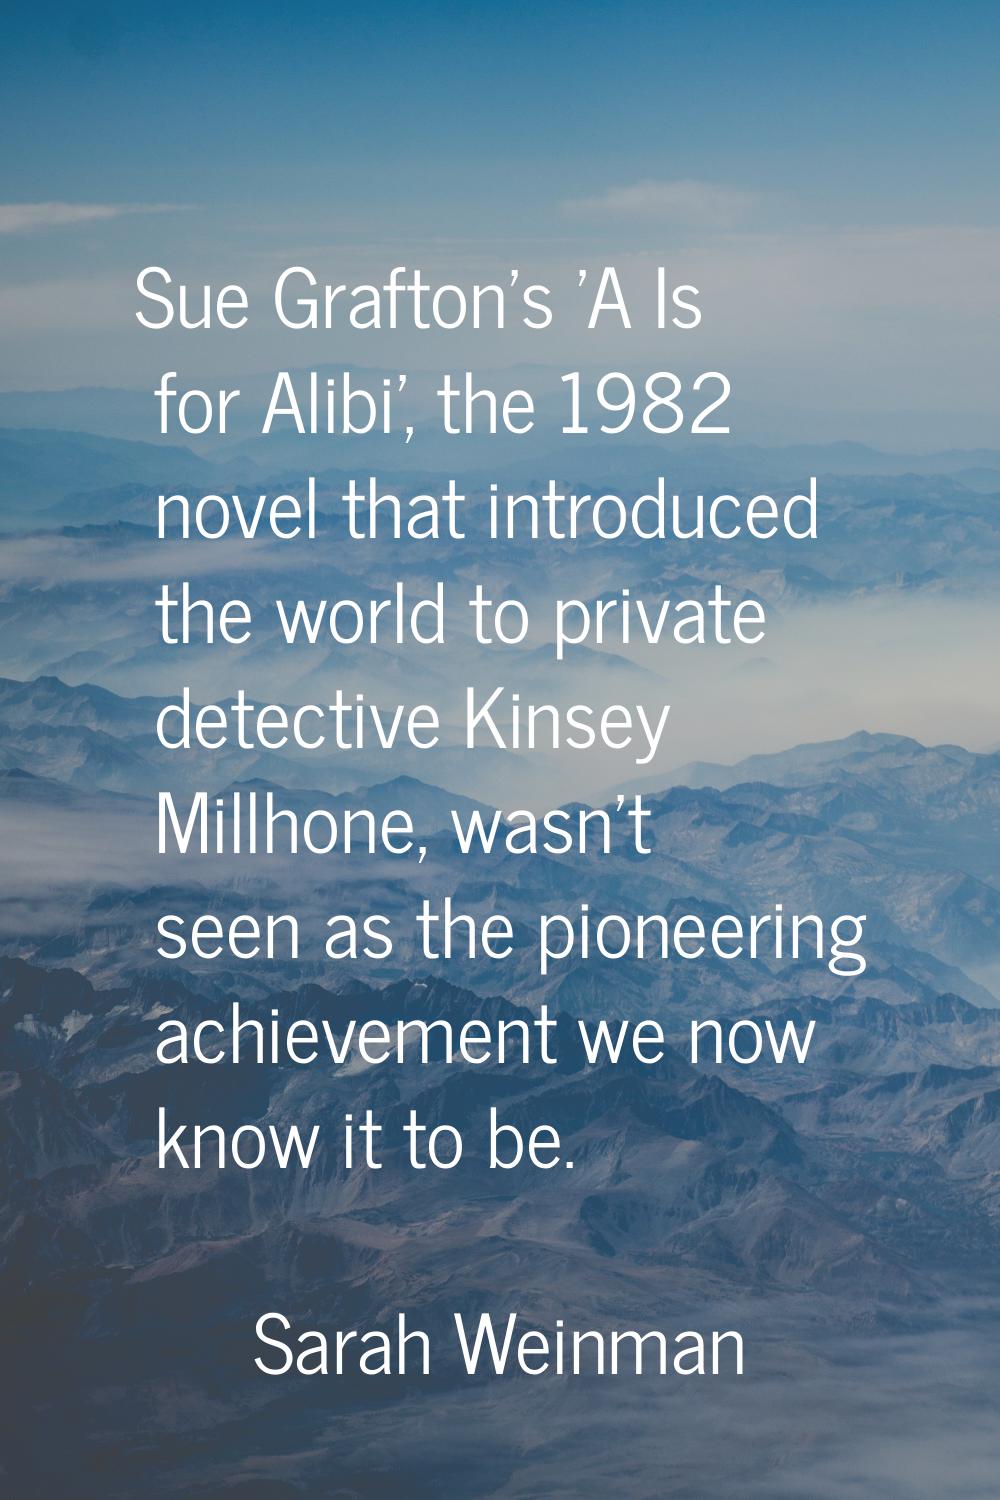 Sue Grafton's 'A Is for Alibi', the 1982 novel that introduced the world to private detective Kinse